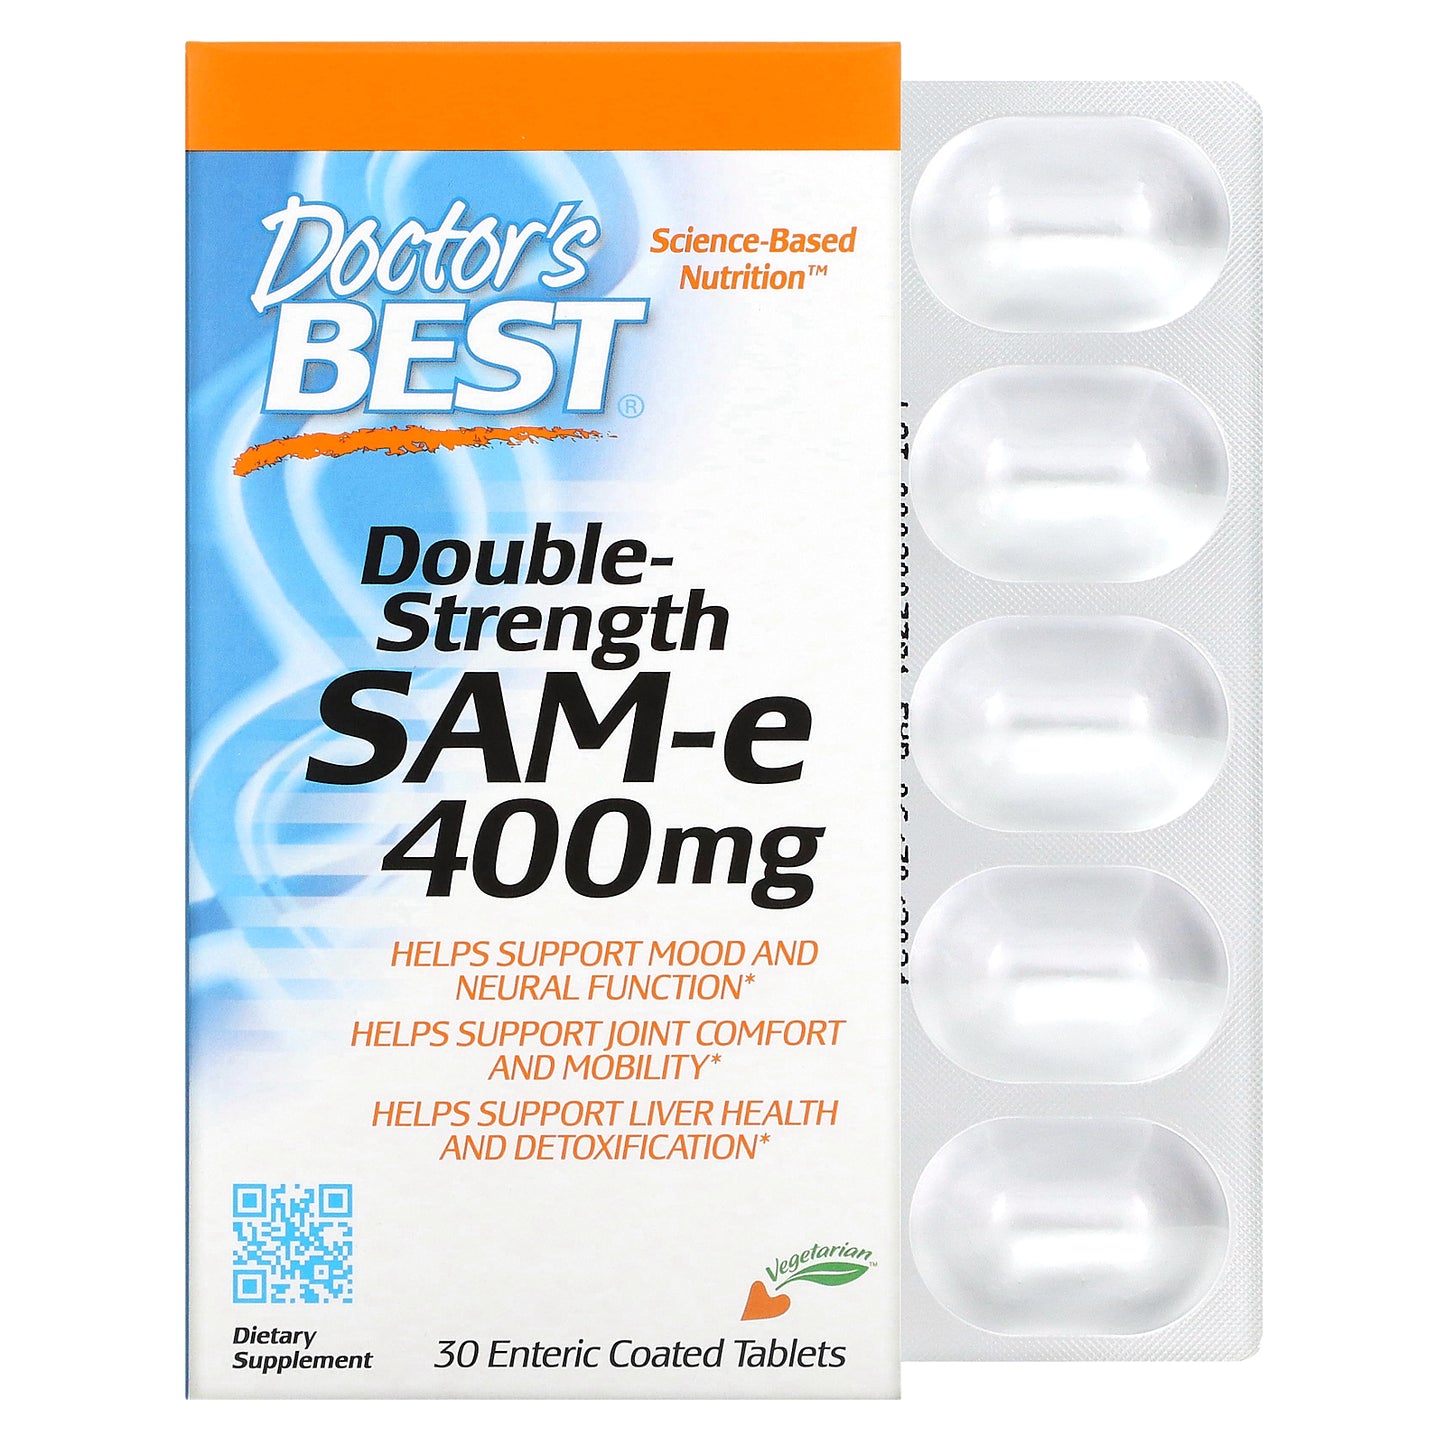 Doctor's Best SAM-e, Double-Strength, 400 mg, 30 Enteric Coated Tablets